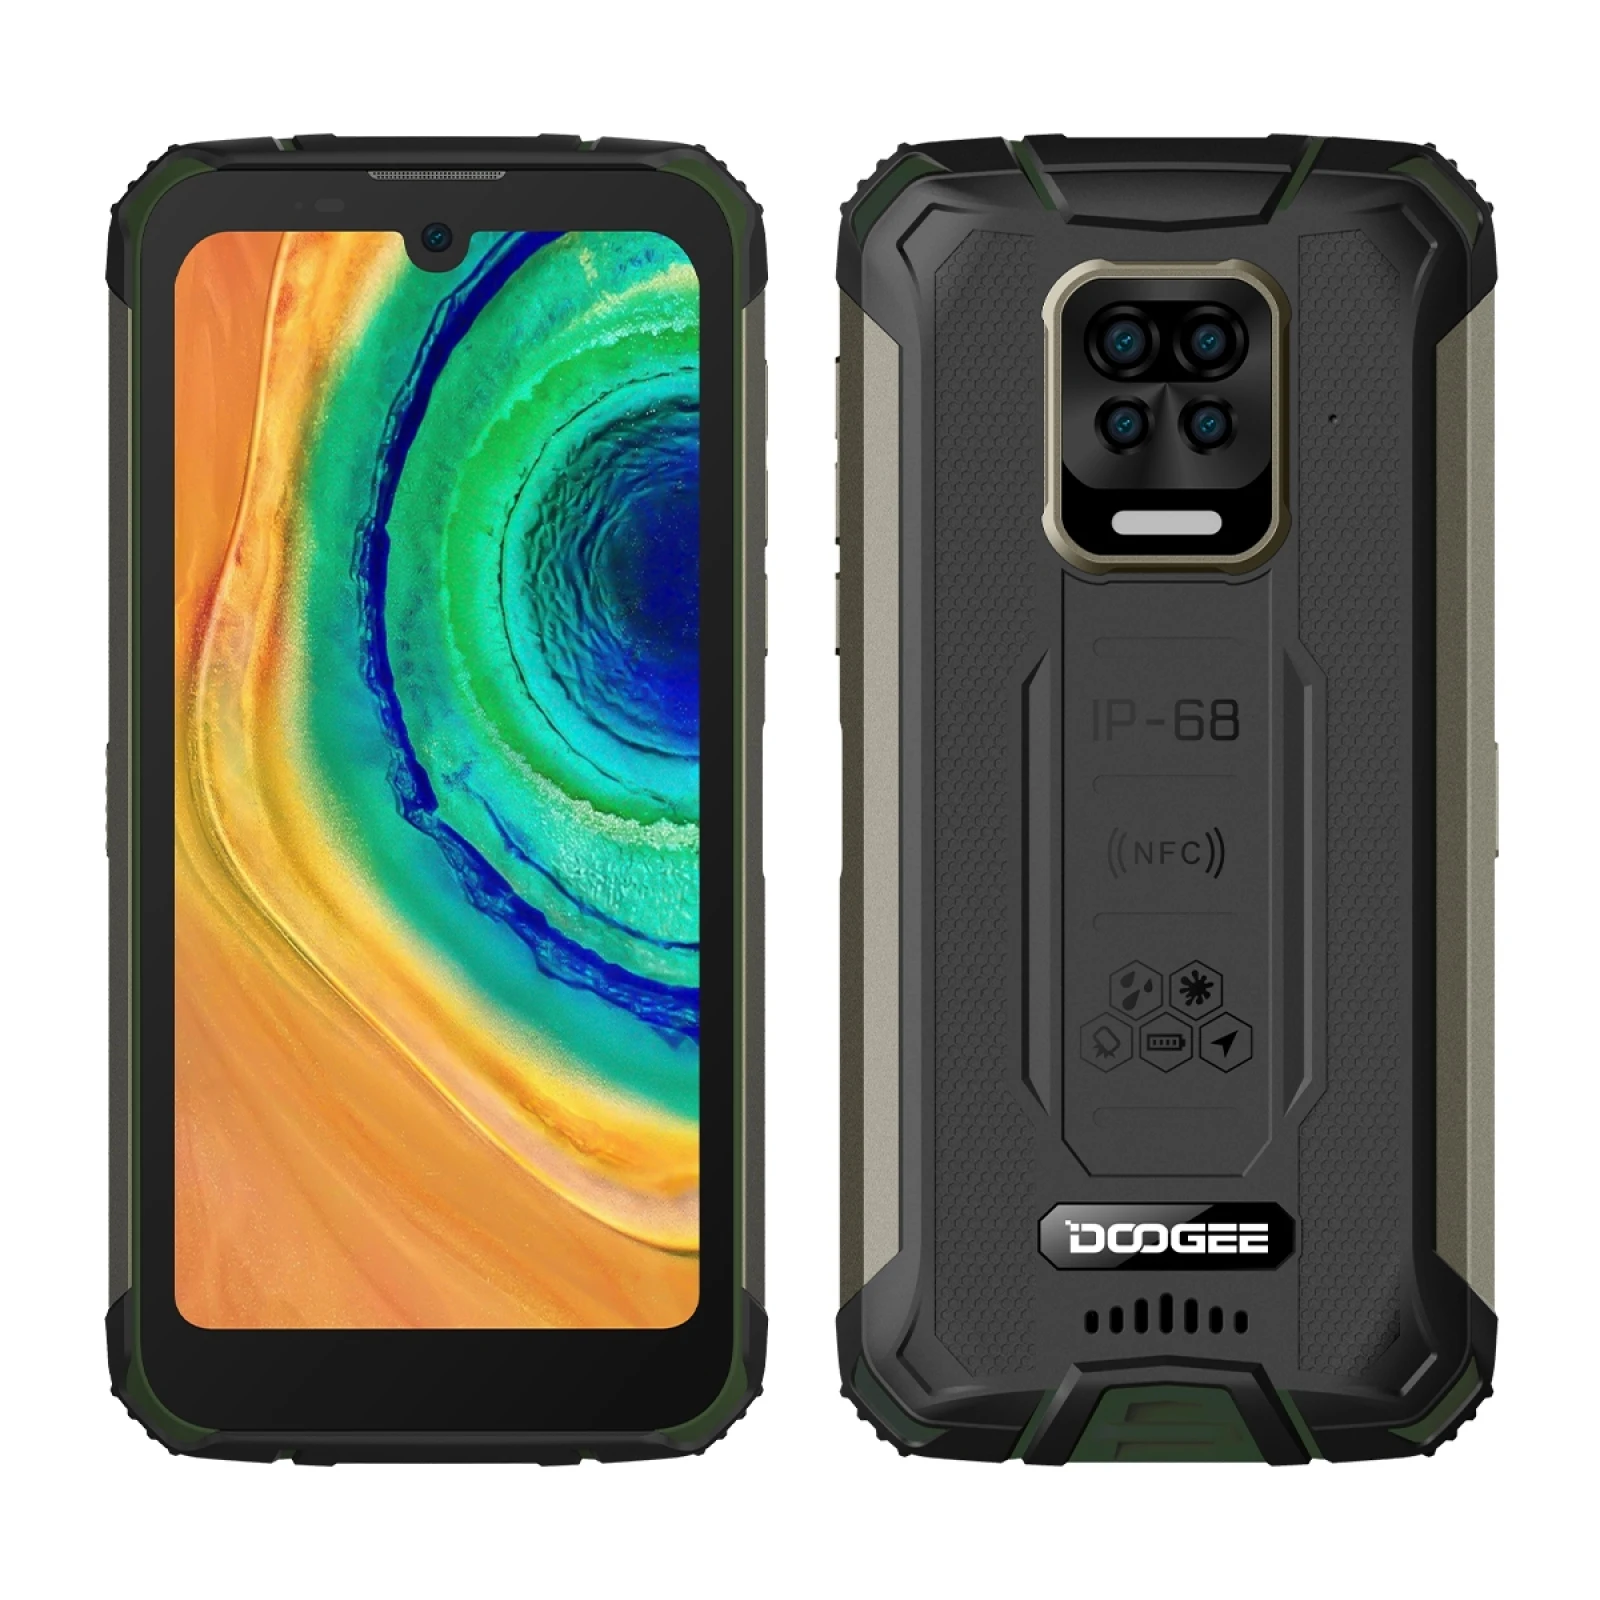 

DOOGEE S59 IP68 Rugged Phone Android 10 Helio A25 Octa-Core 4GB RAM 64GB ROM 5.71" Waterdrop Smartphone 16MP 10050mAh Face ID